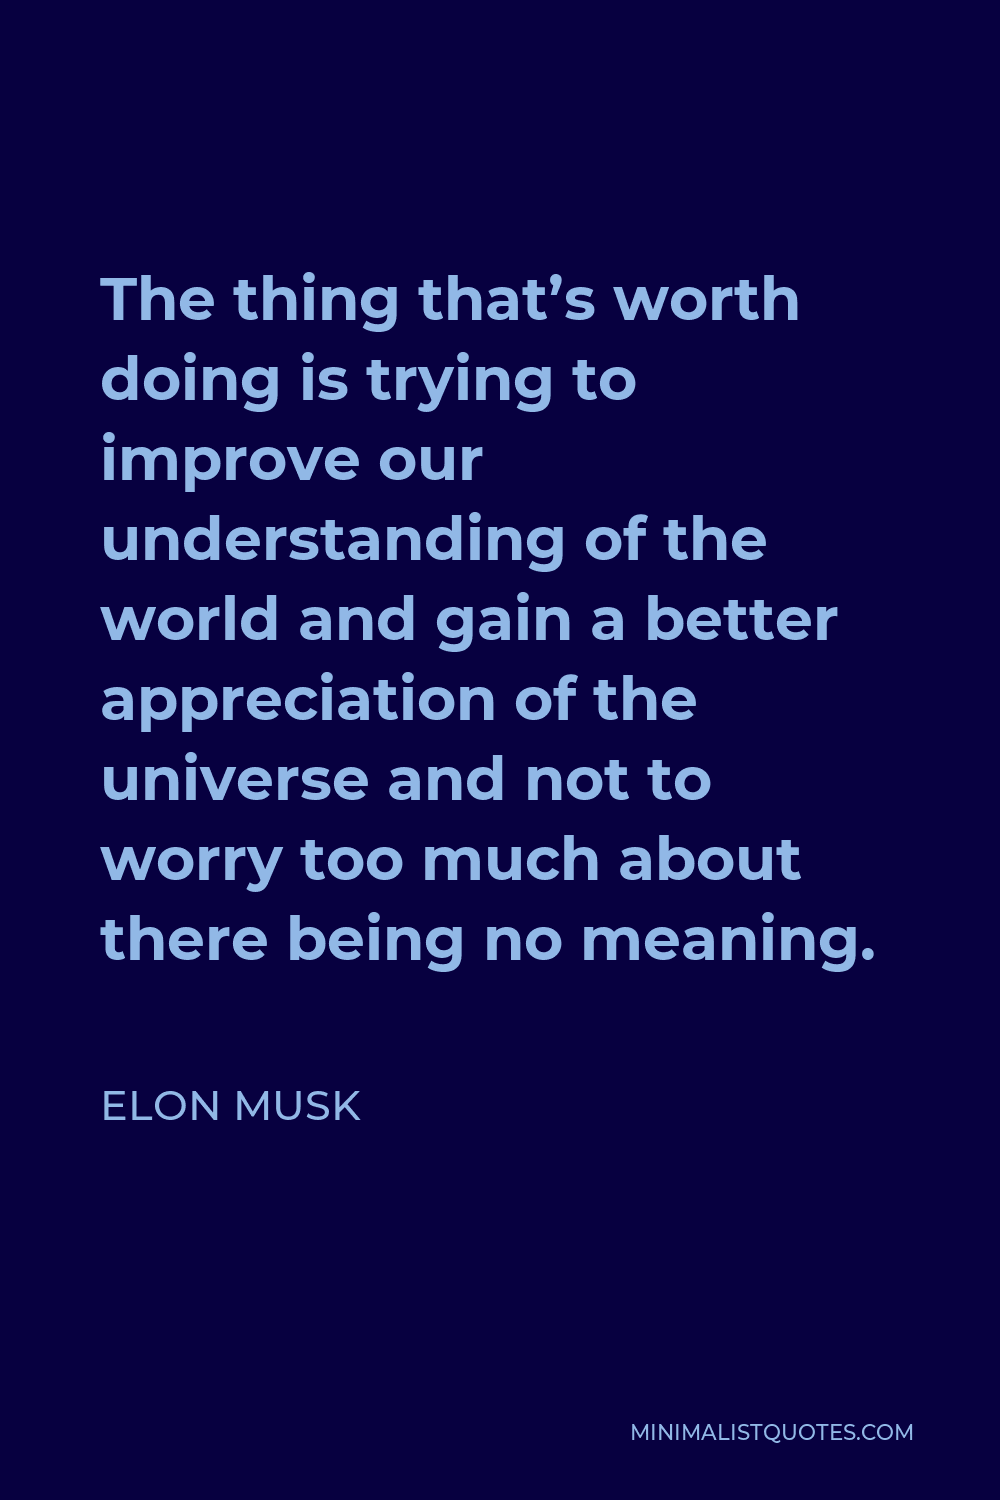 Elon Musk Quote - The thing that’s worth doing is trying to improve our understanding of the world and gain a better appreciation of the universe and not to worry too much about there being no meaning.